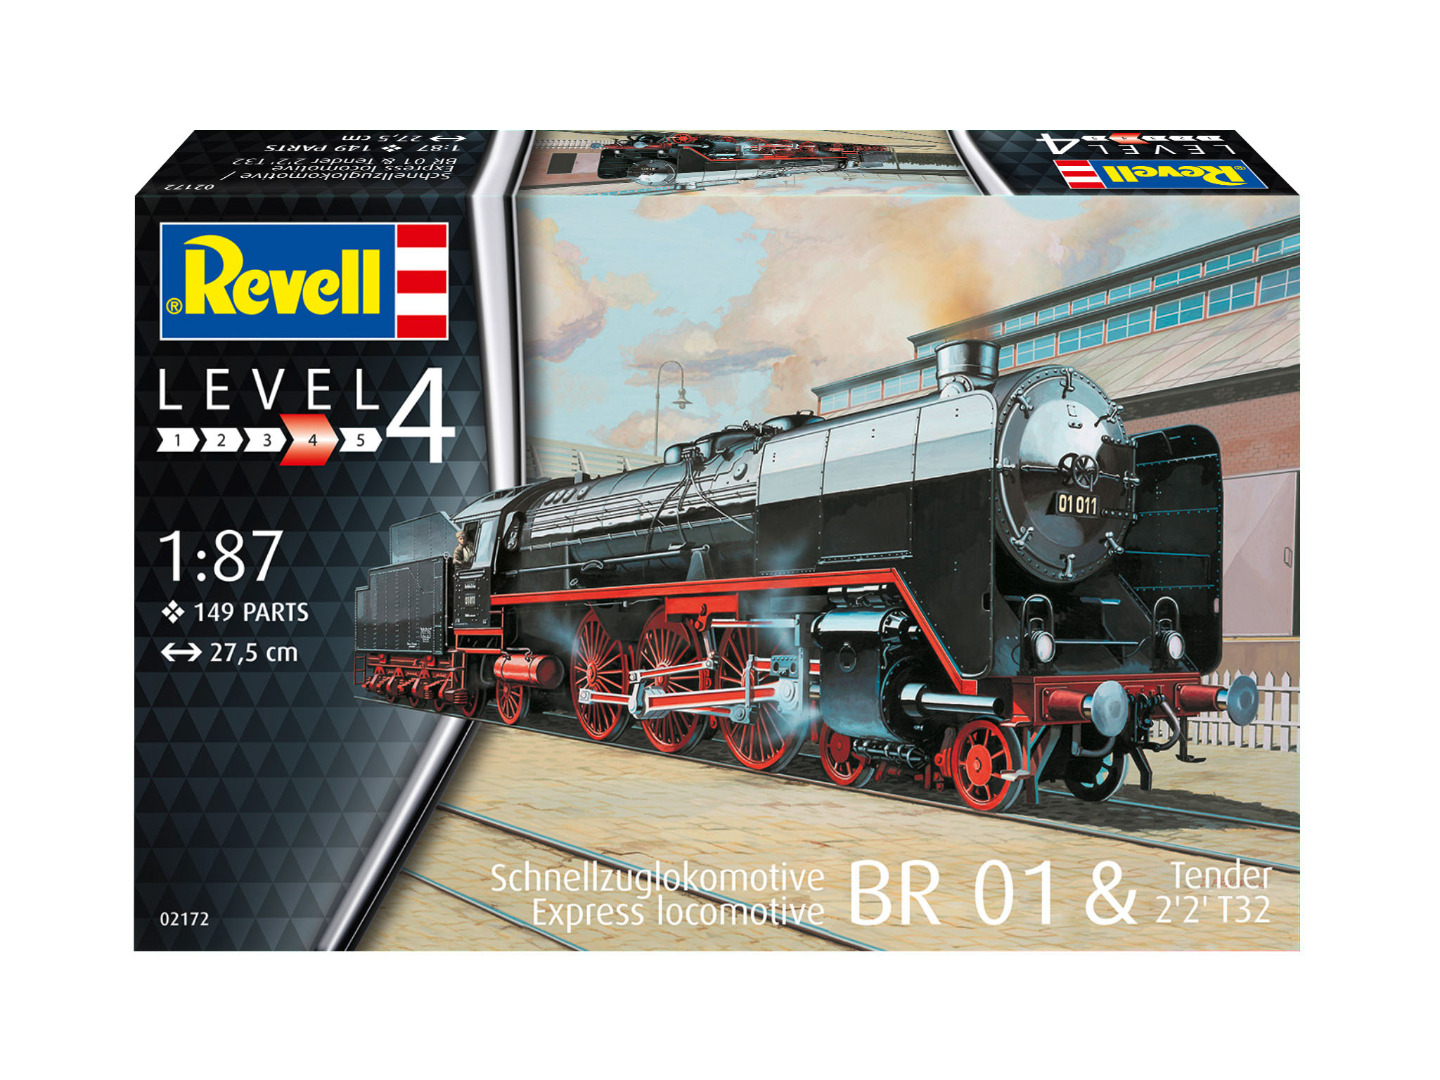 Revell Model Set Express locomotive BR01 with tender 2'2' T32 Scale 1:87